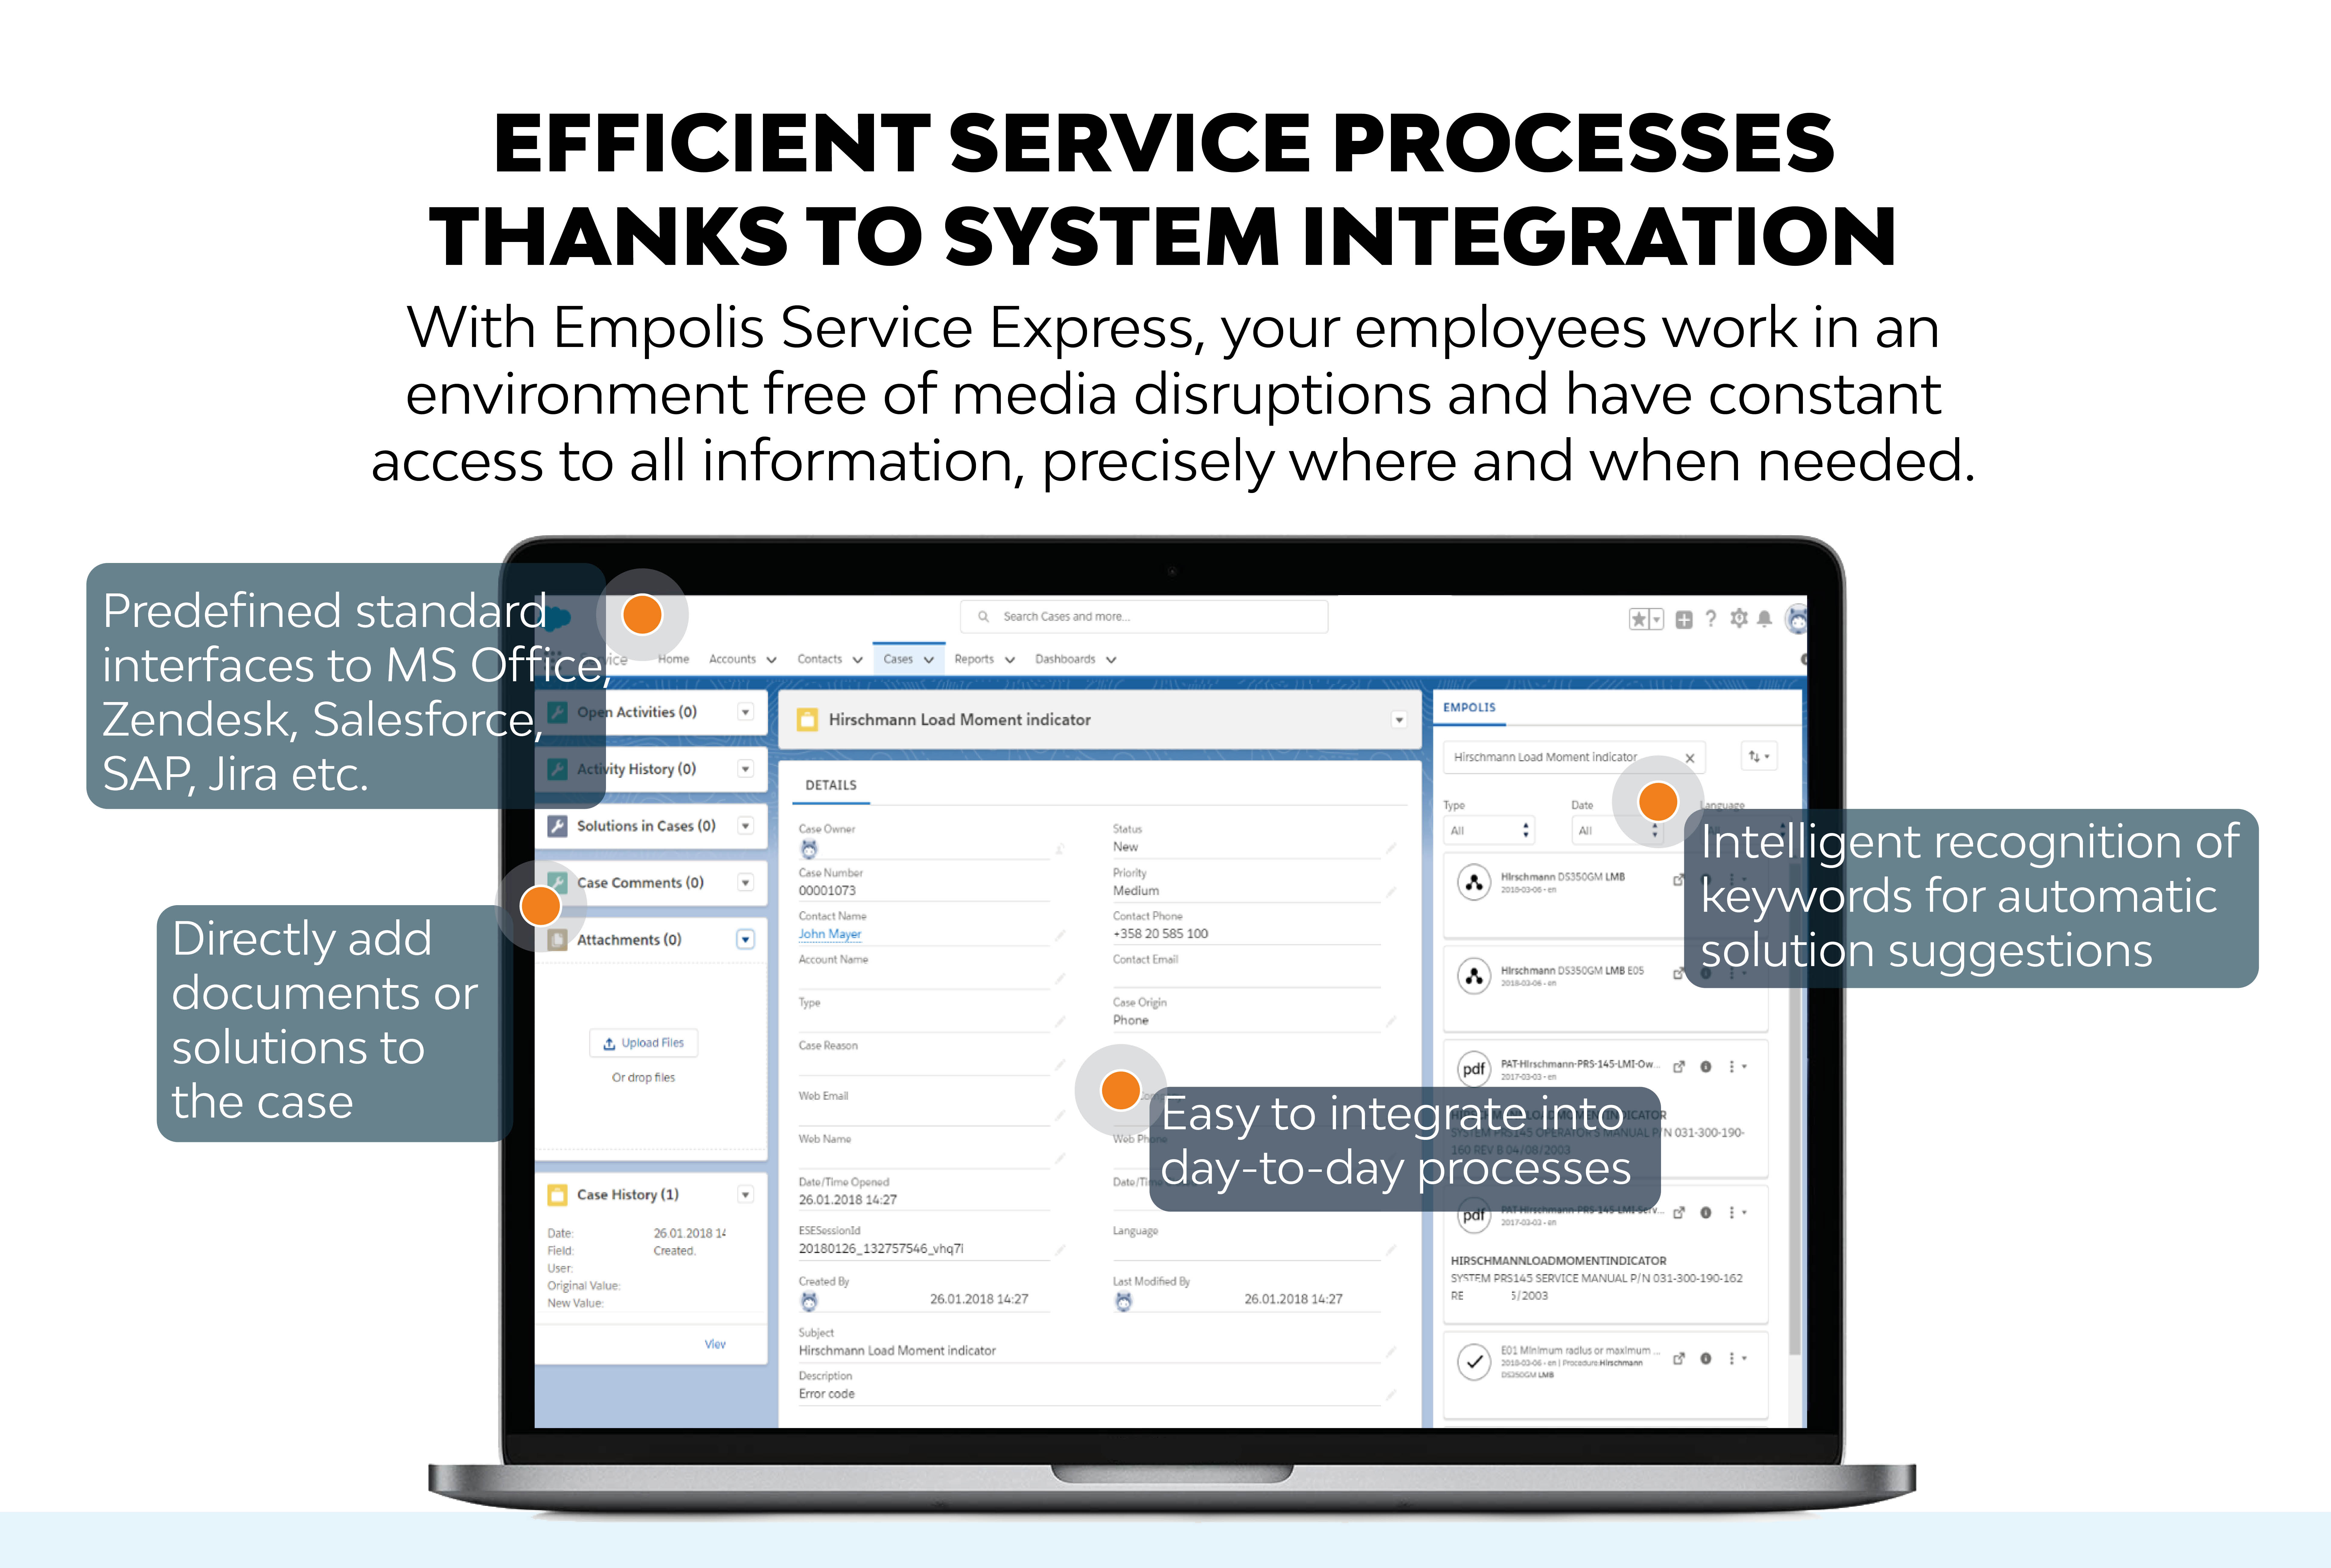 Efficient services processes thanks to seamless system integration